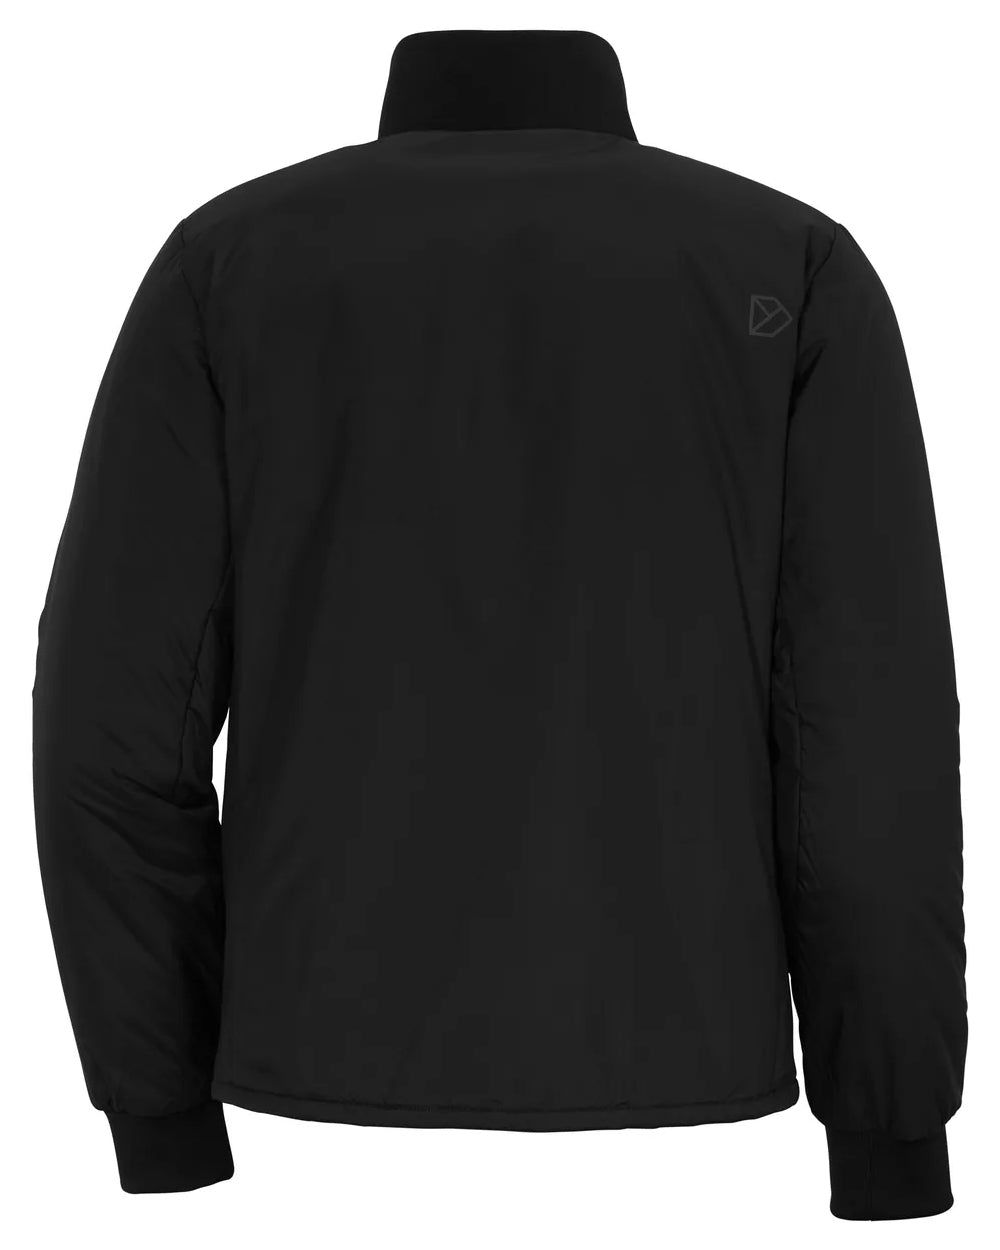 Black Coloured Didriksons Peder Jacket On A White Background 